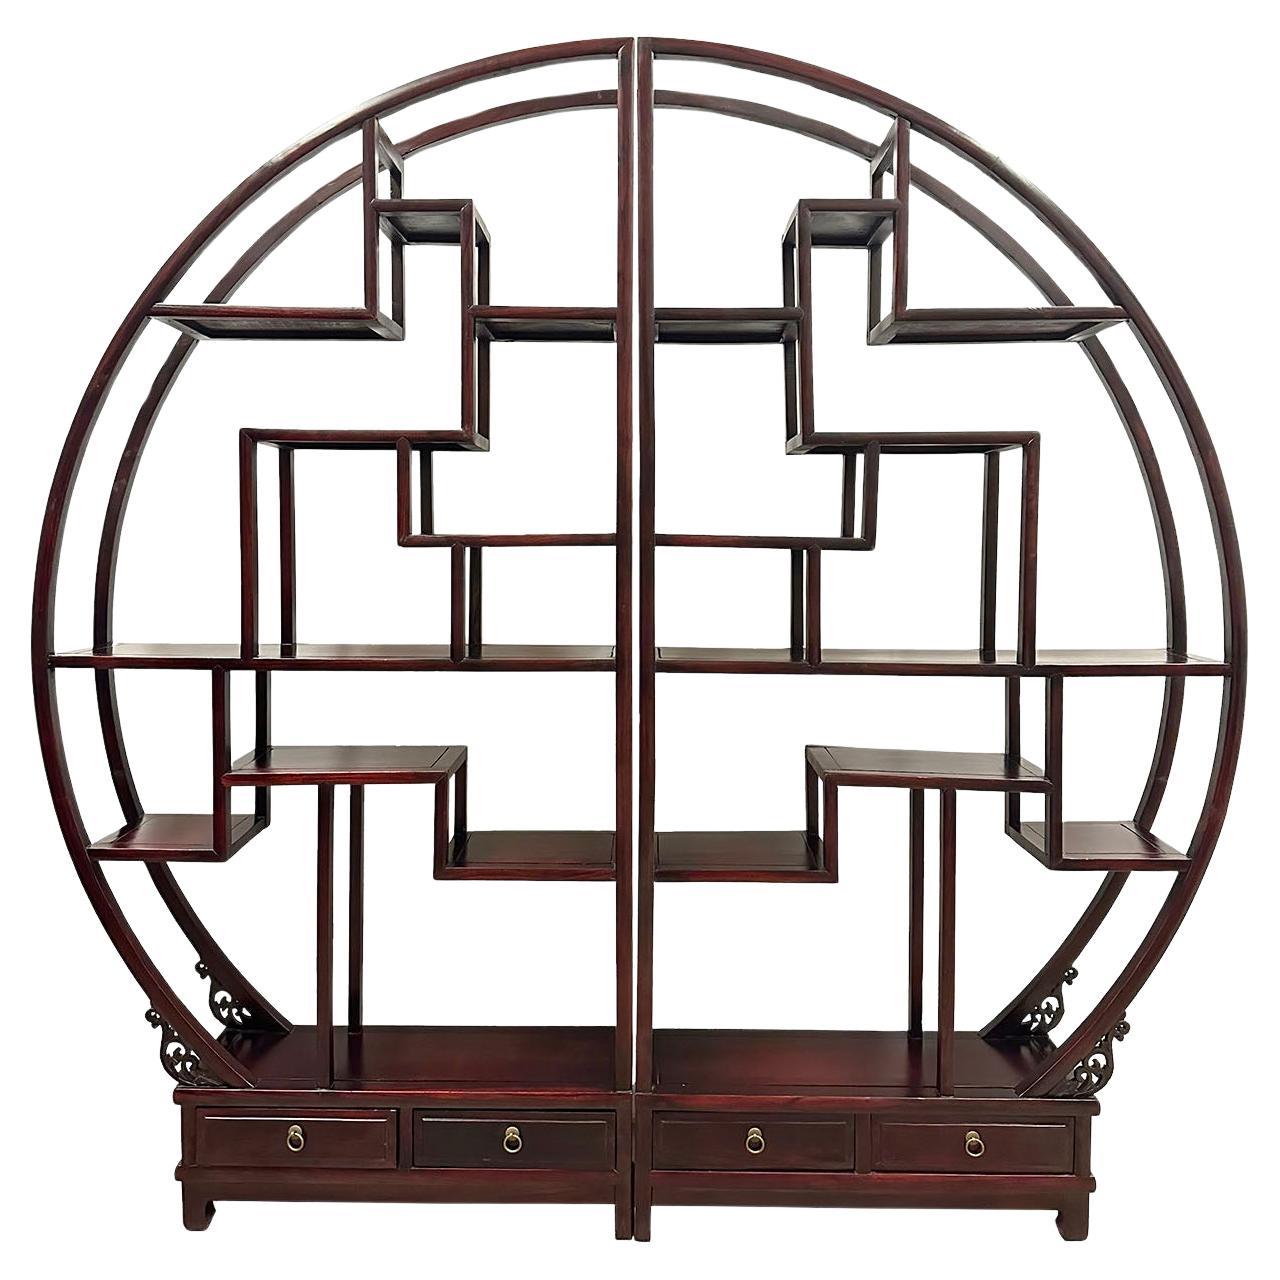 Mid-20th Century Chinese Carved Collector's Display Shelf/Room Divider For Sale